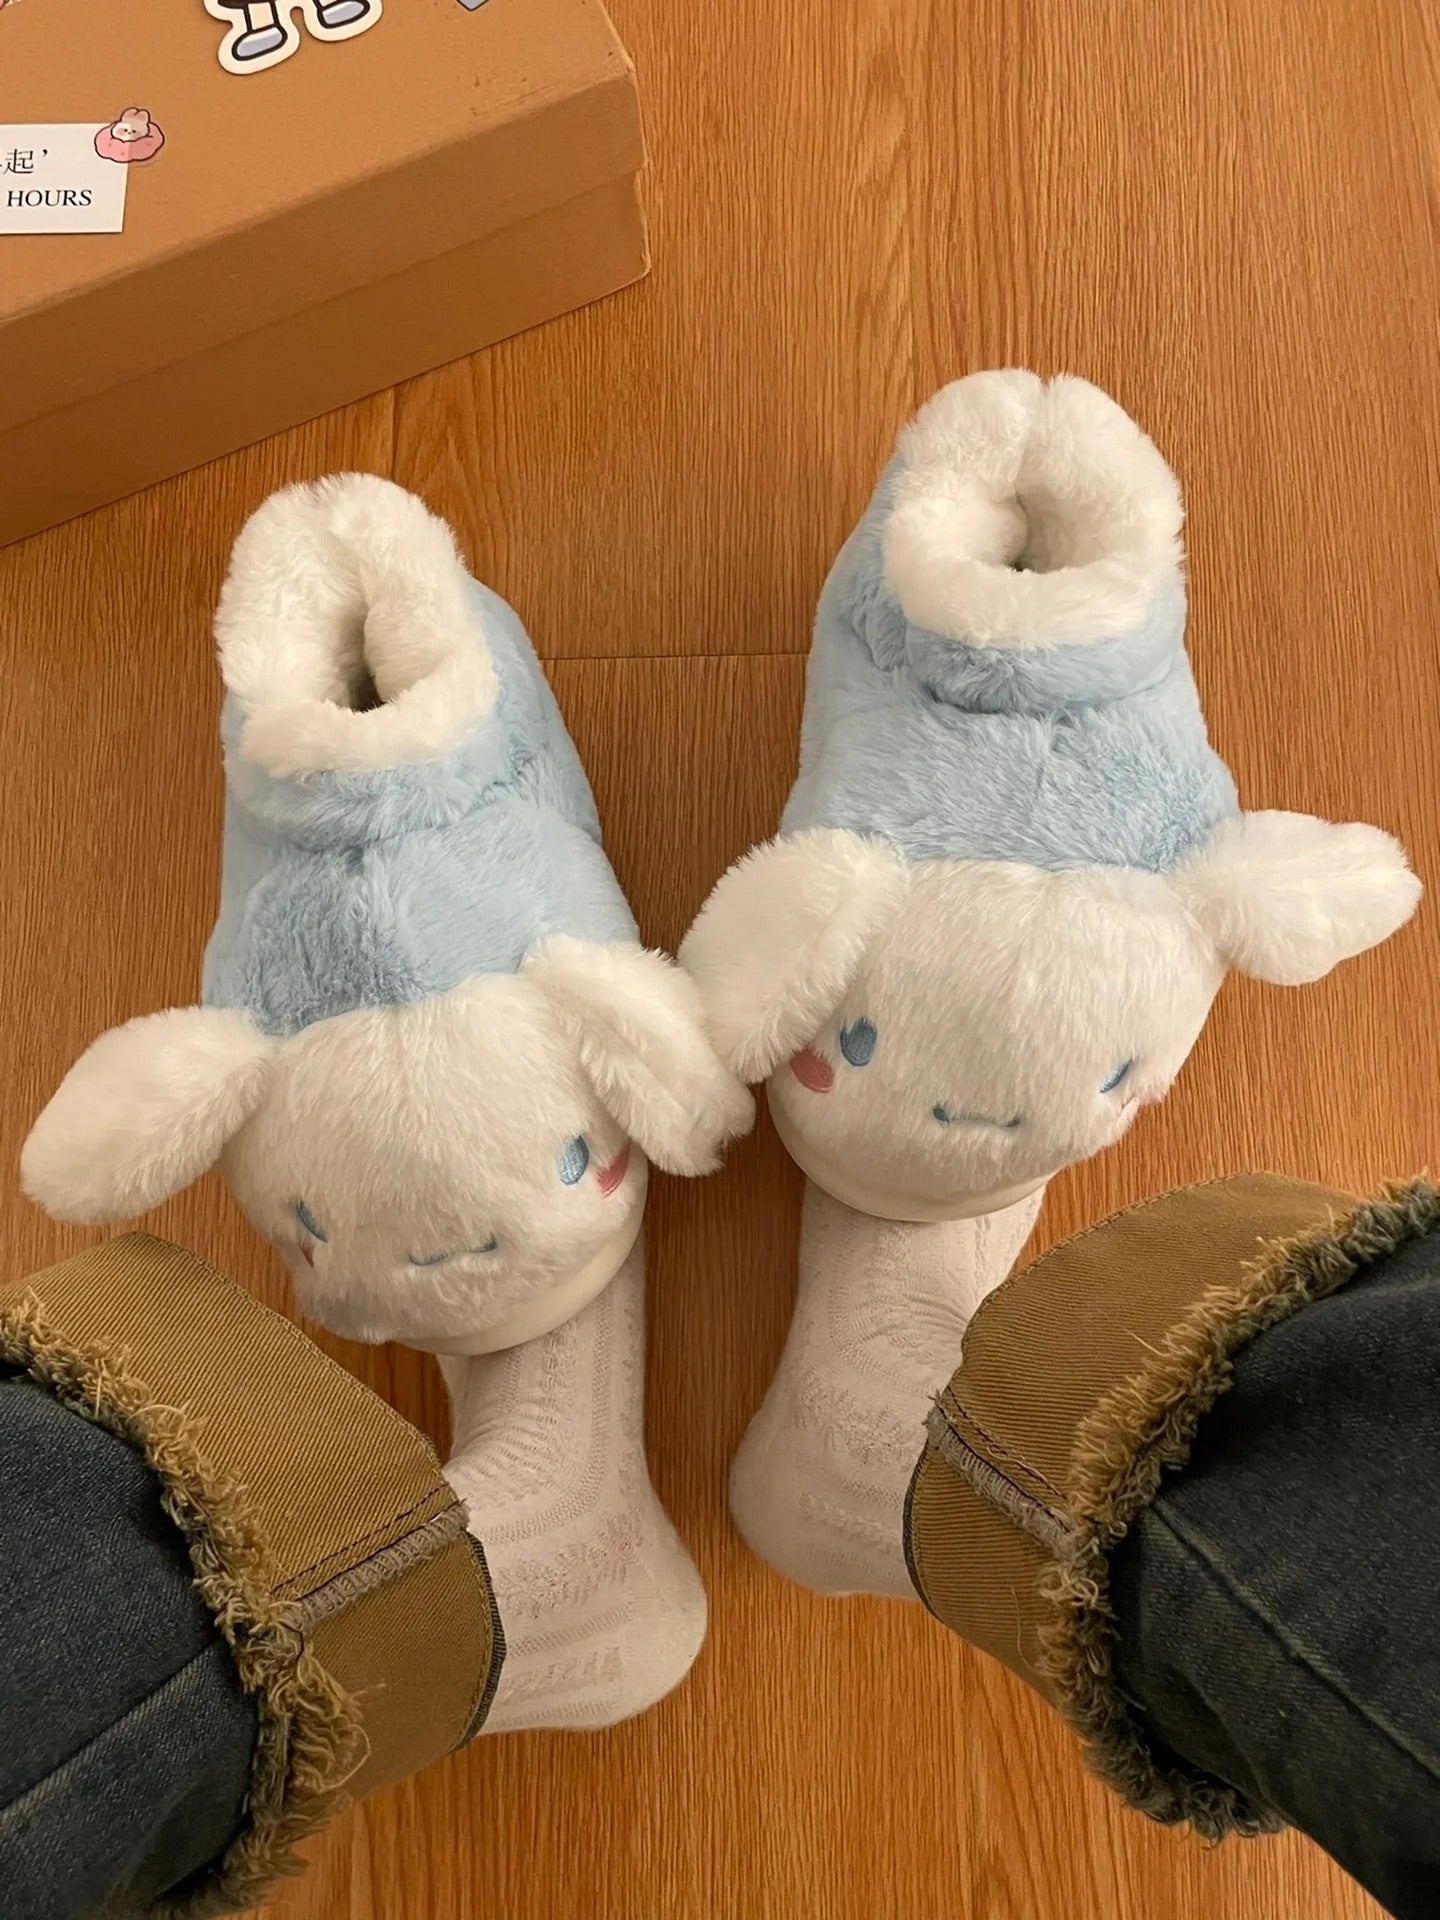 Sanrio slippers warm thick sole slippers